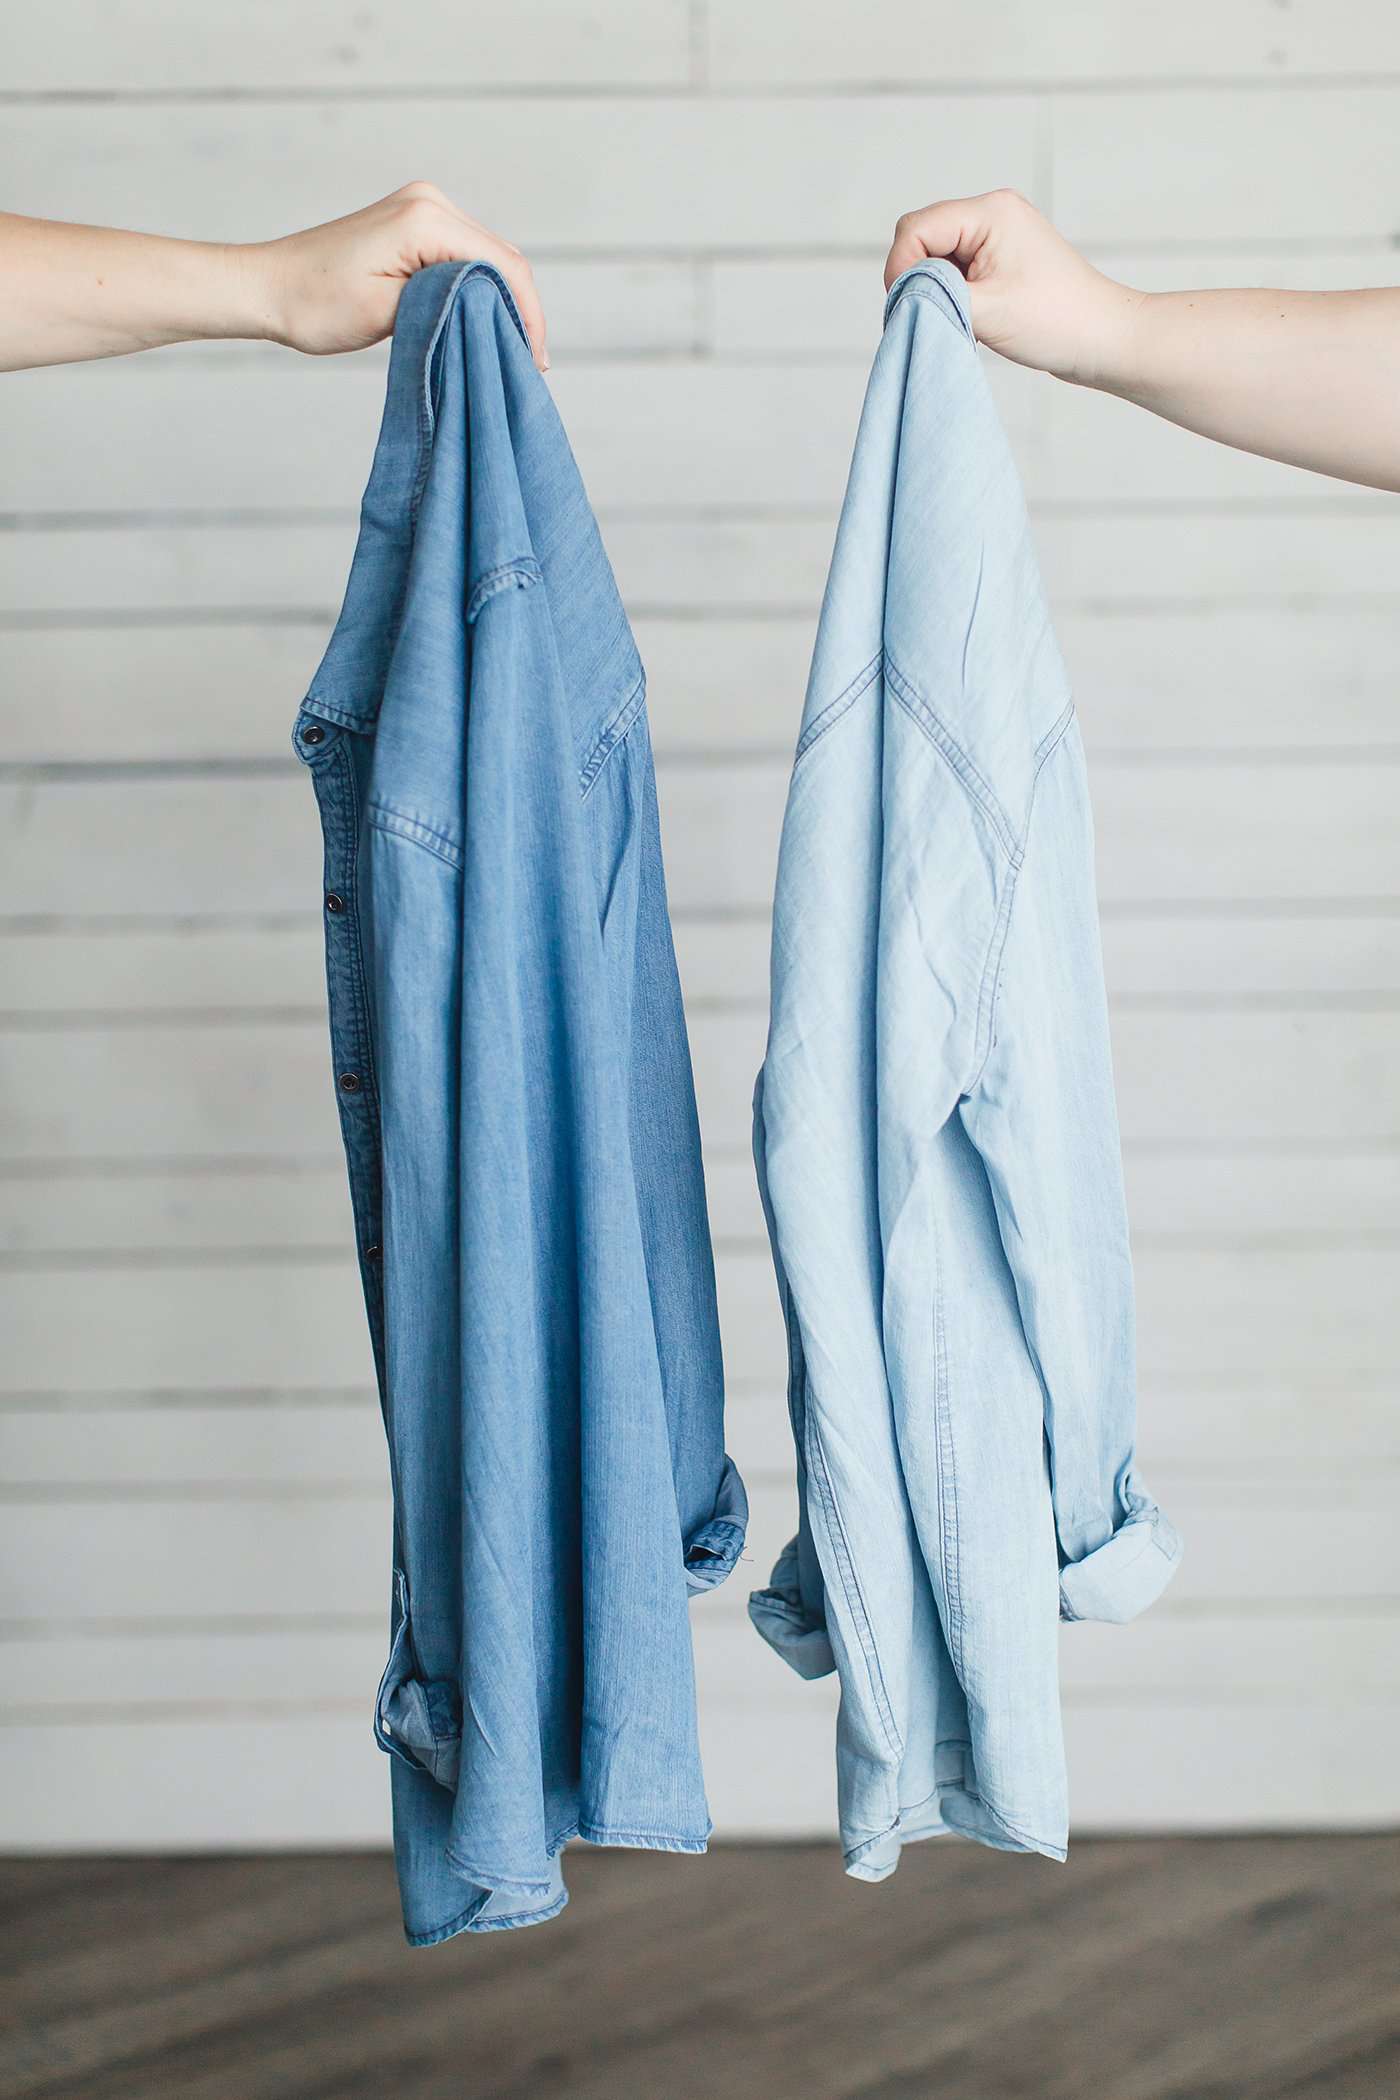 Classic Chambray Button Up - FINAL SALE Tops